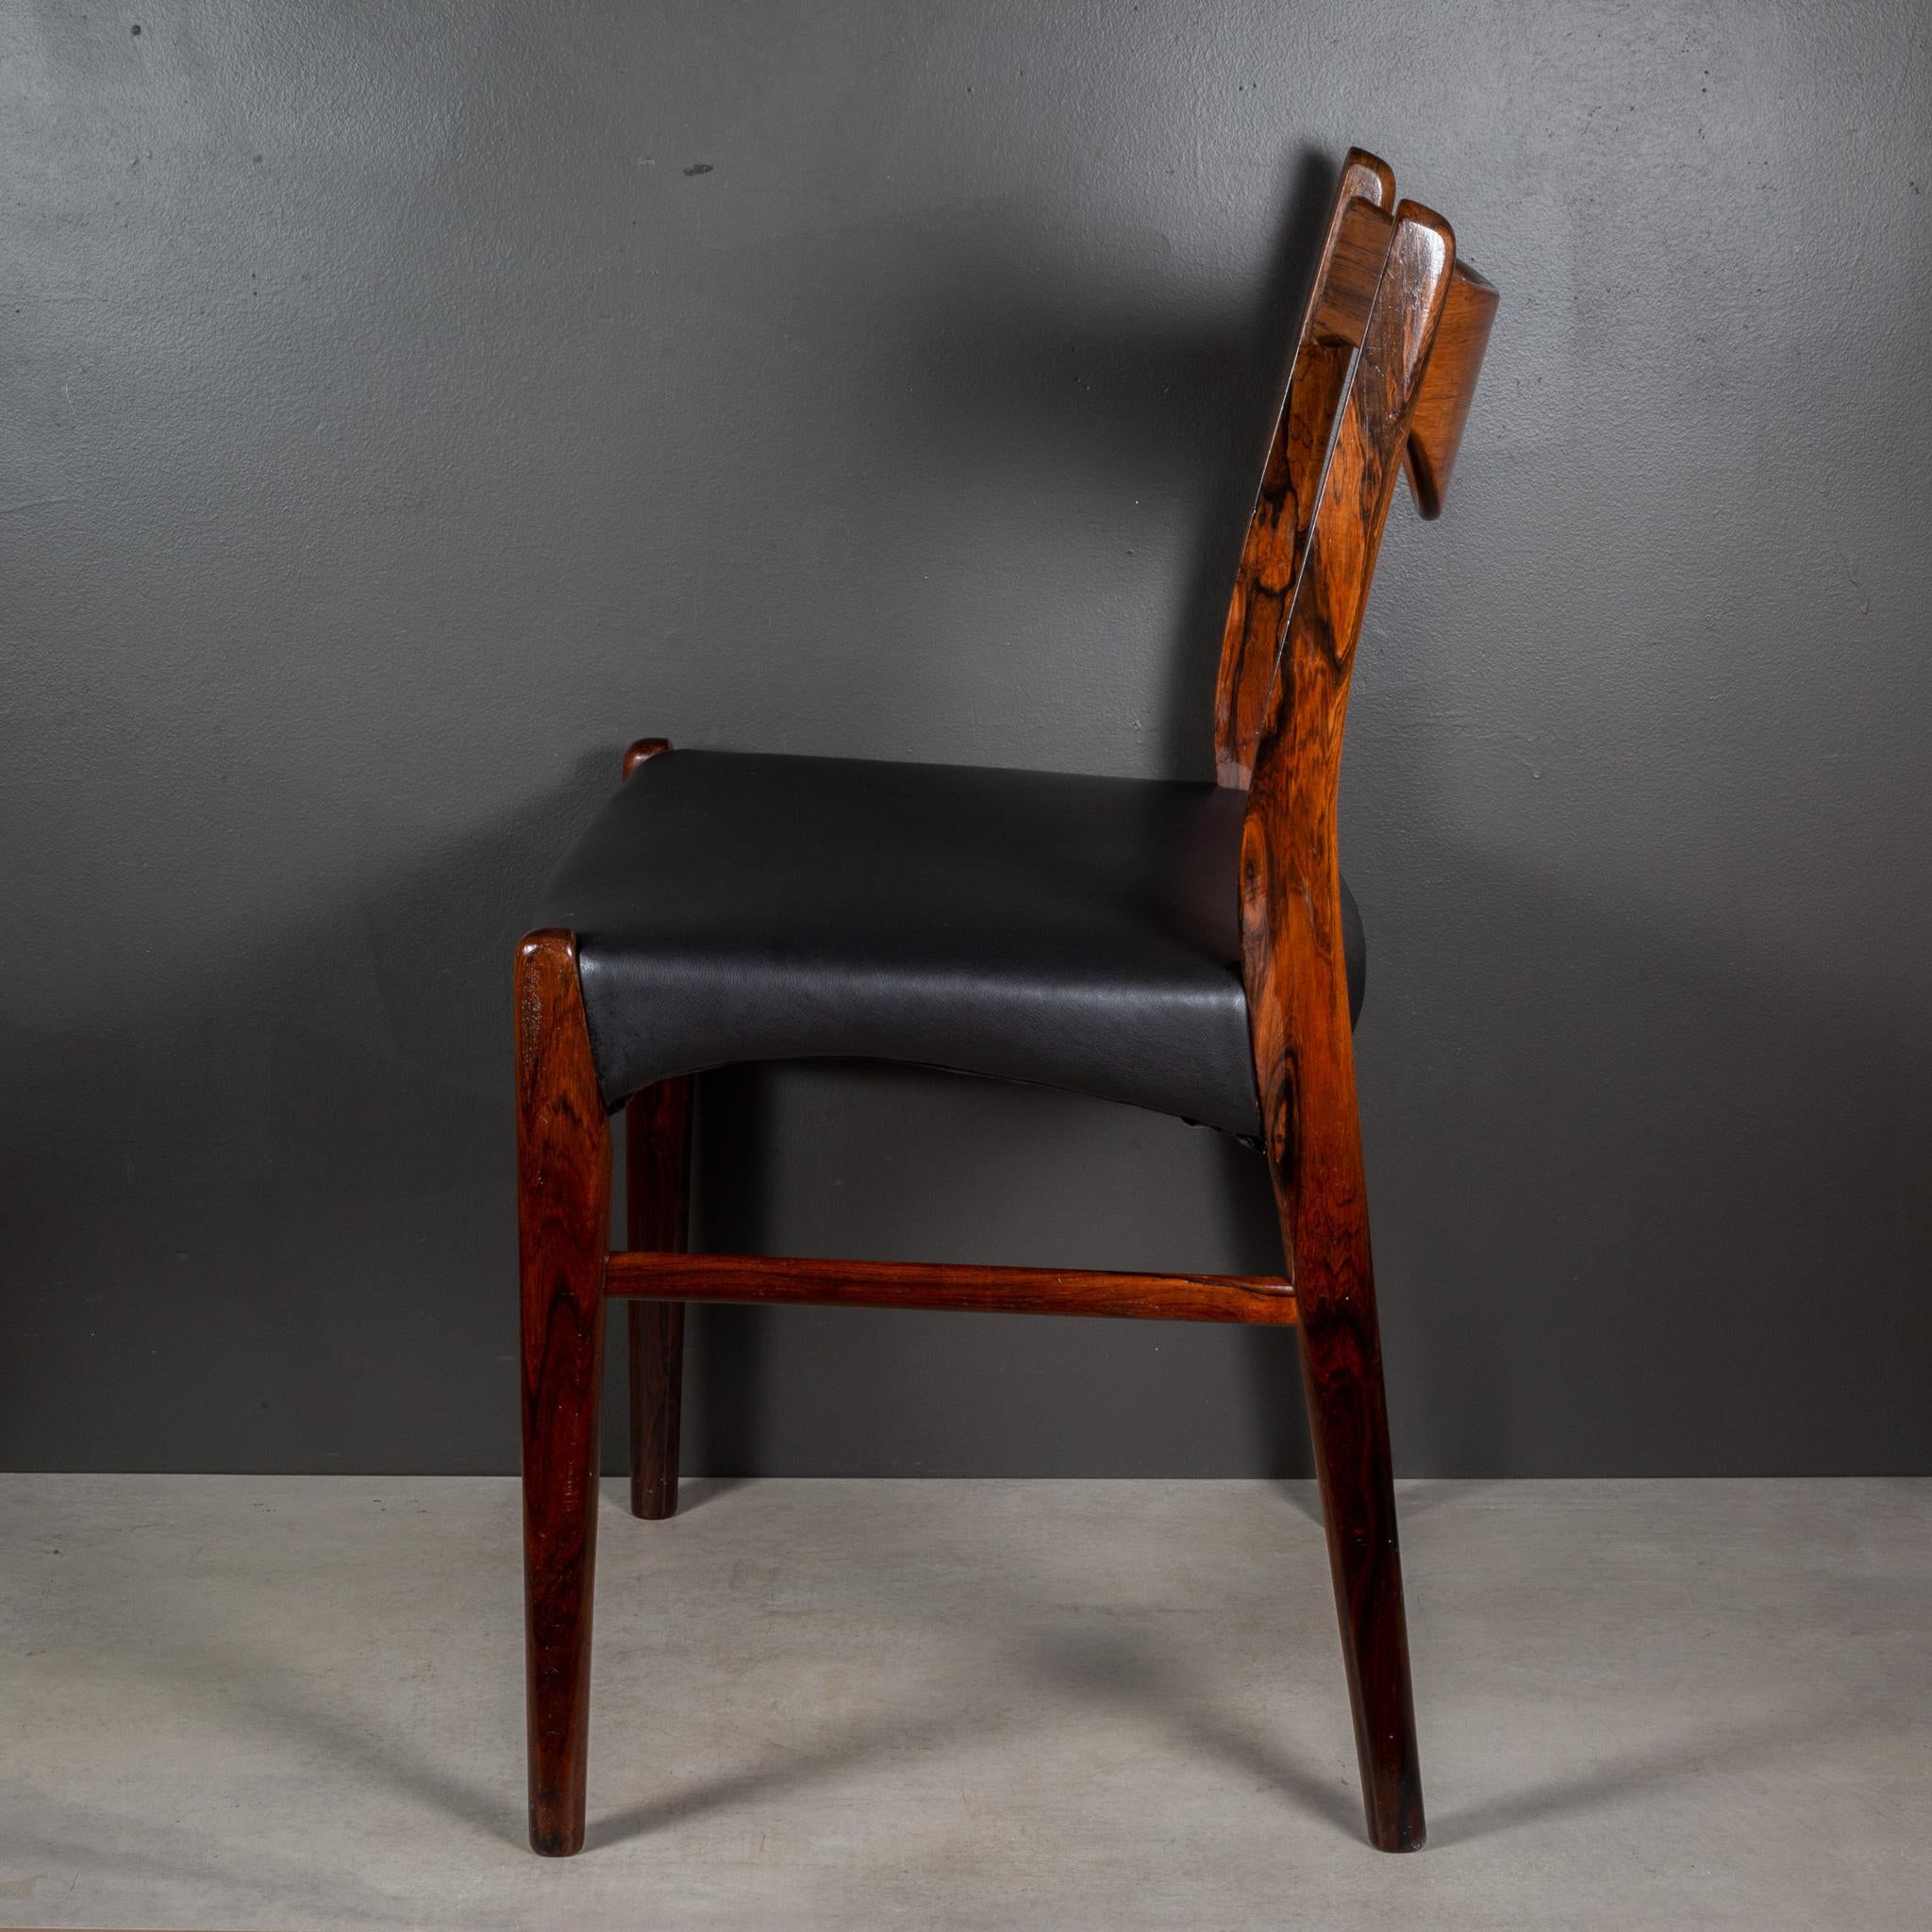 Arne Wahl Iversen Model GS61 Rosewood and Leather Dining Chairs c.1950 For Sale 6